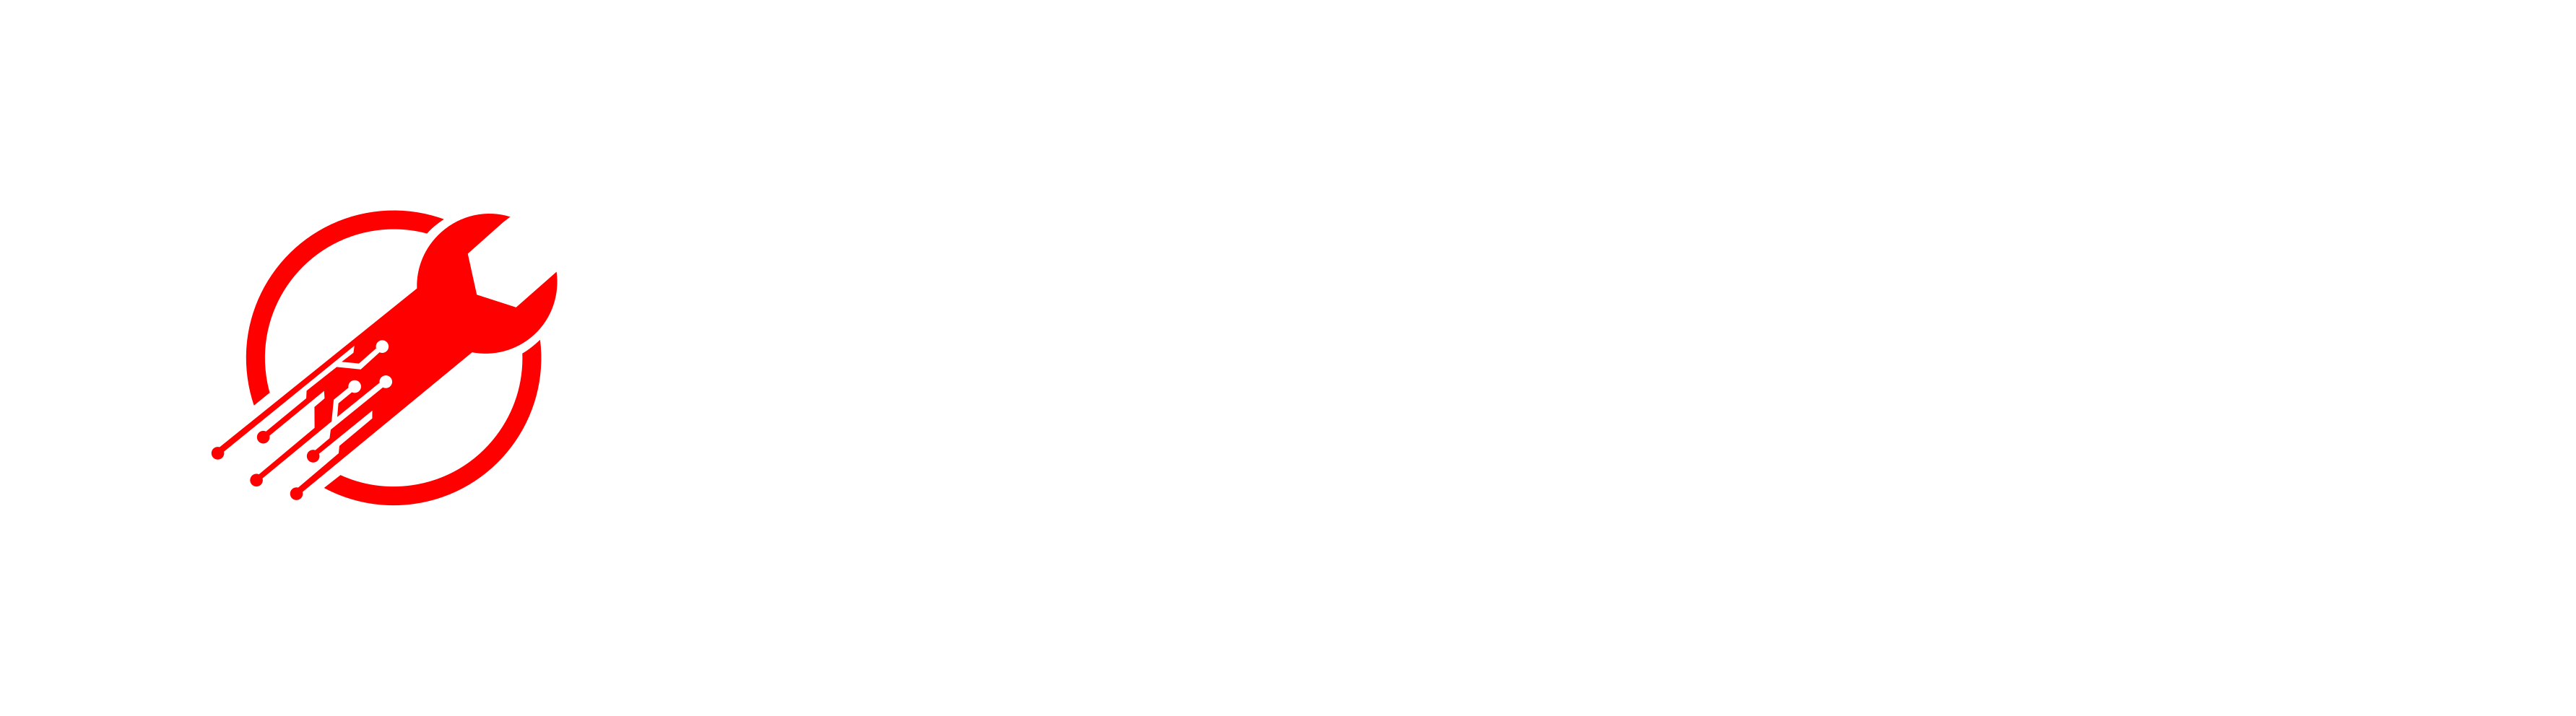 Cox Technical Consulting